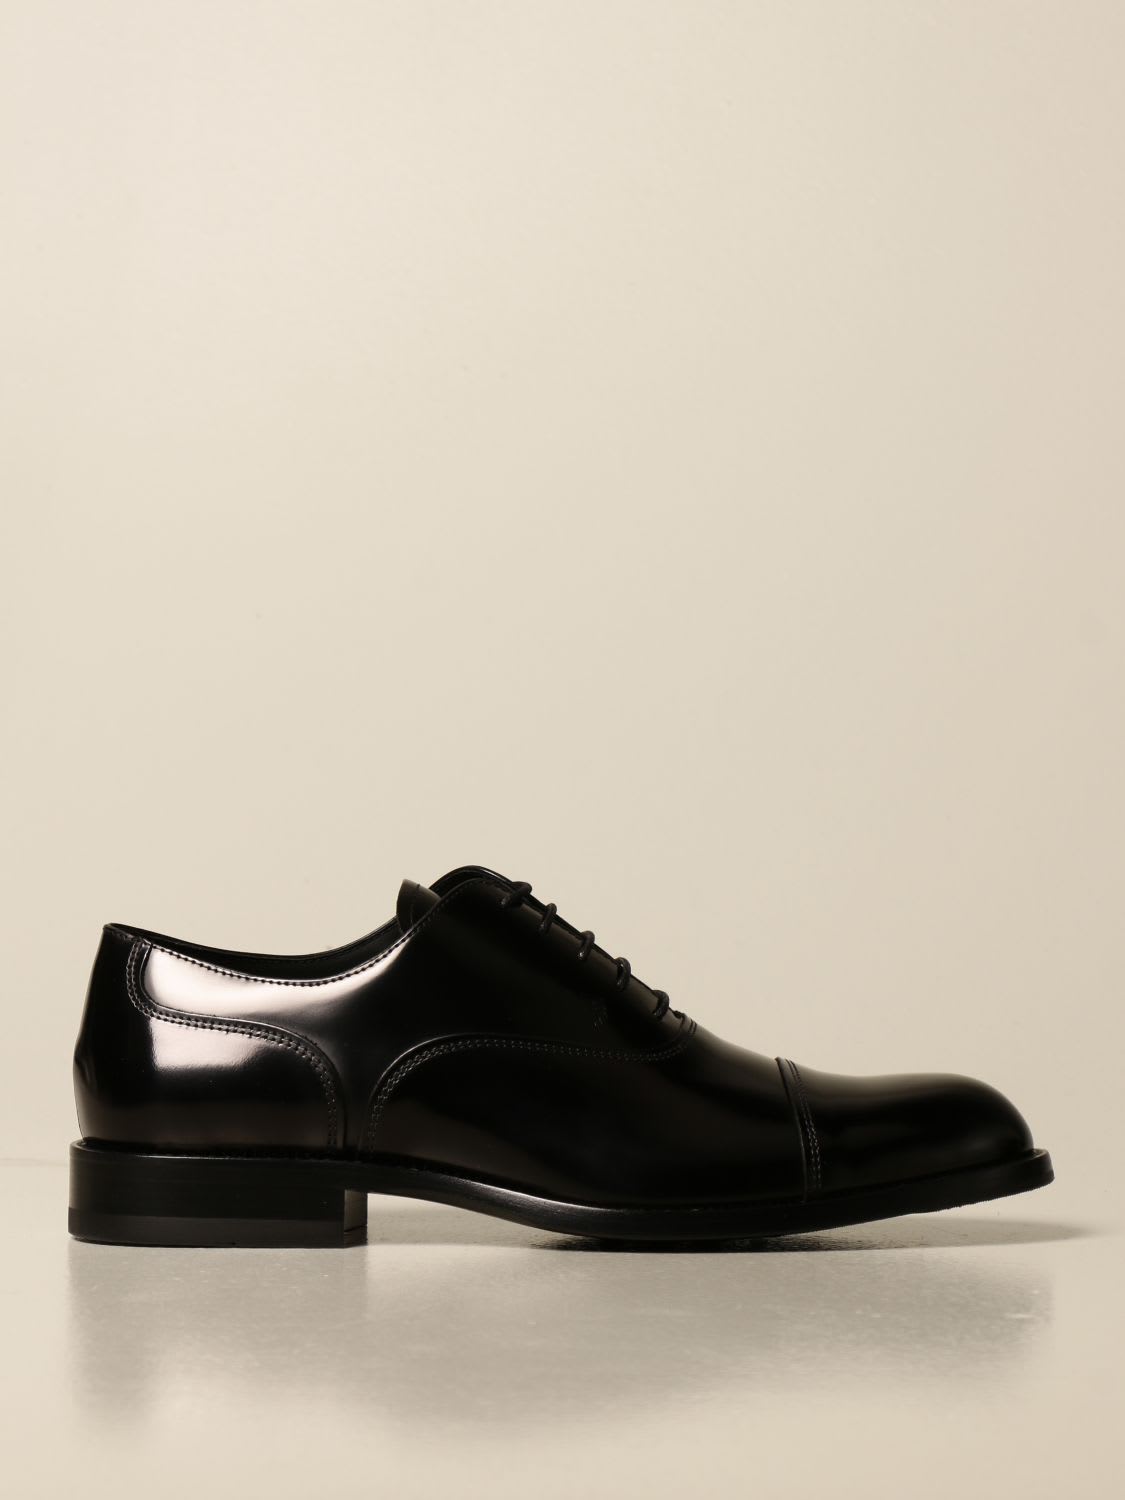 Tods Brogue Shoes Tods Oxford Shoes In Brushed Calfskin